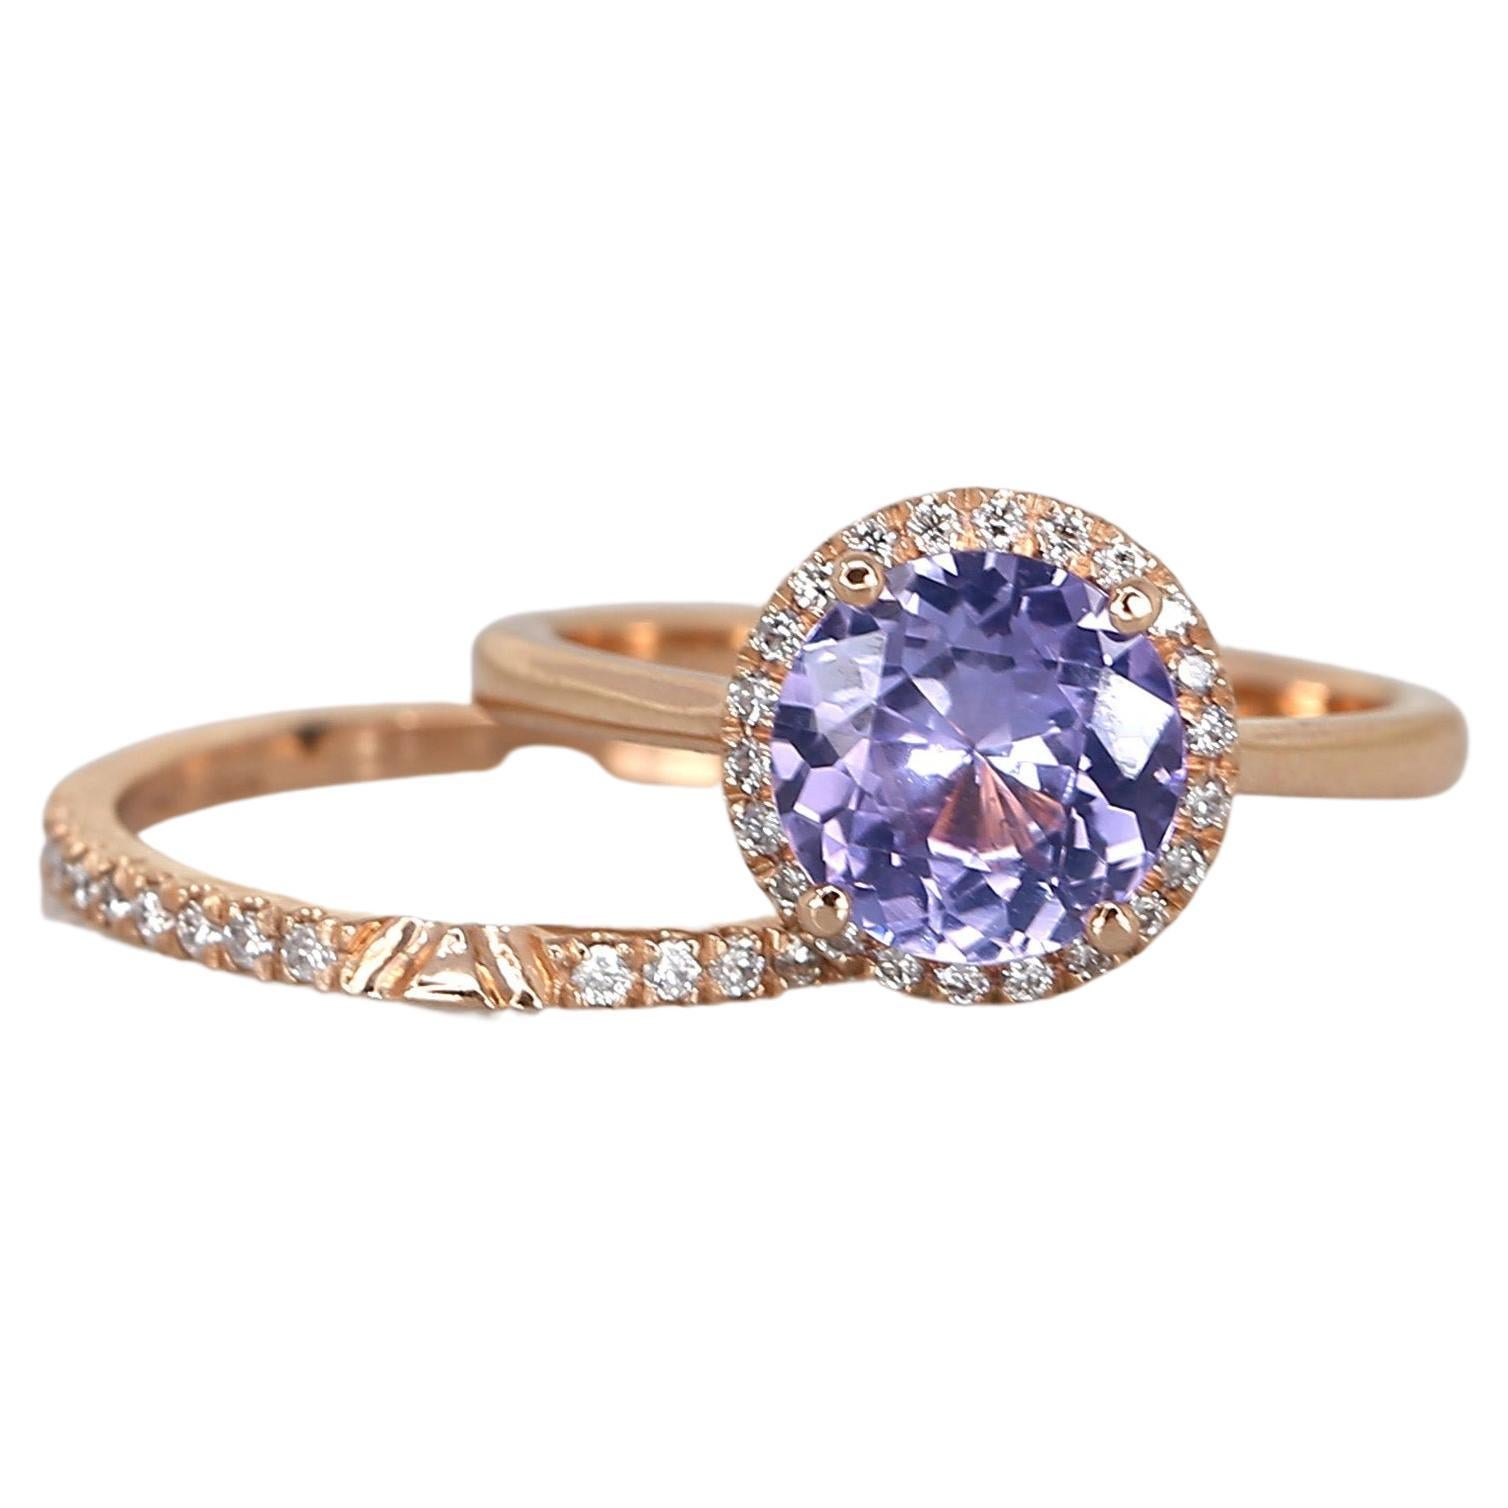 Discover our exquisite our purple sapphire halo ring and matching diamond wedding ring. This stunning set showcases a unique purple sapphire in a timeless round halo design. The dainty yet elegant style of the halo ring perfectly complements the